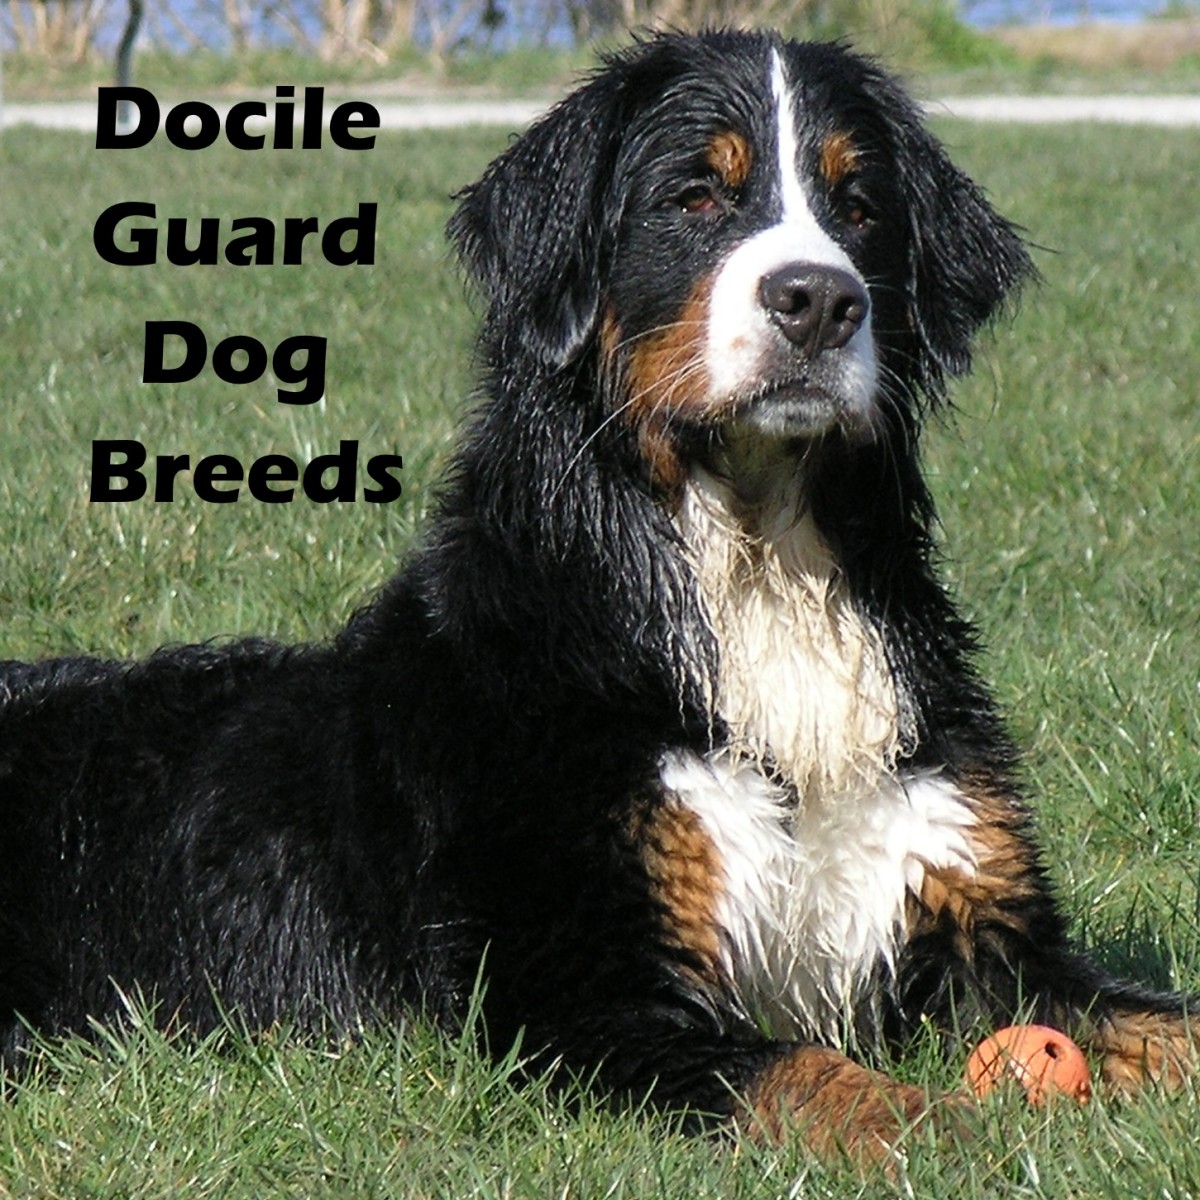 7 Dog Breeds That Make Docile Guard Dogs Pethelpful